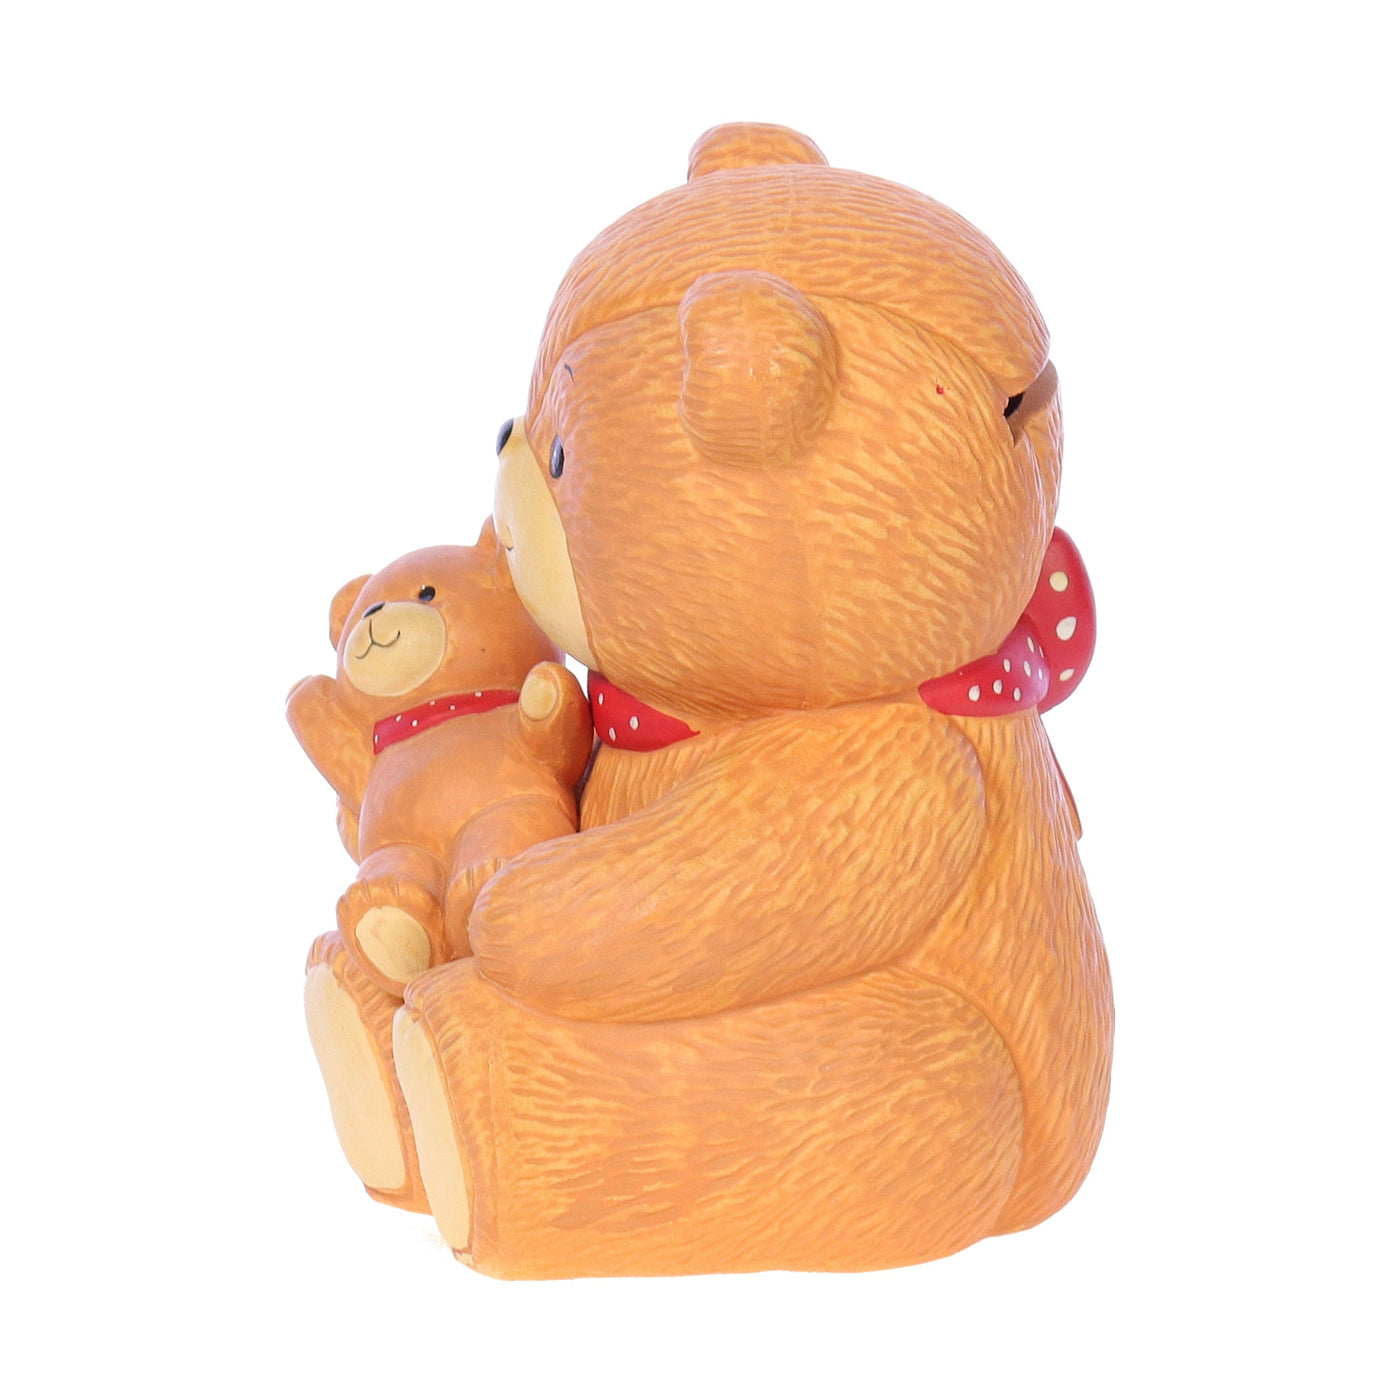 Lucy_and_Me_Mommy_Bear_with_Baby_Coin_Bank_Family_Figurine_1984